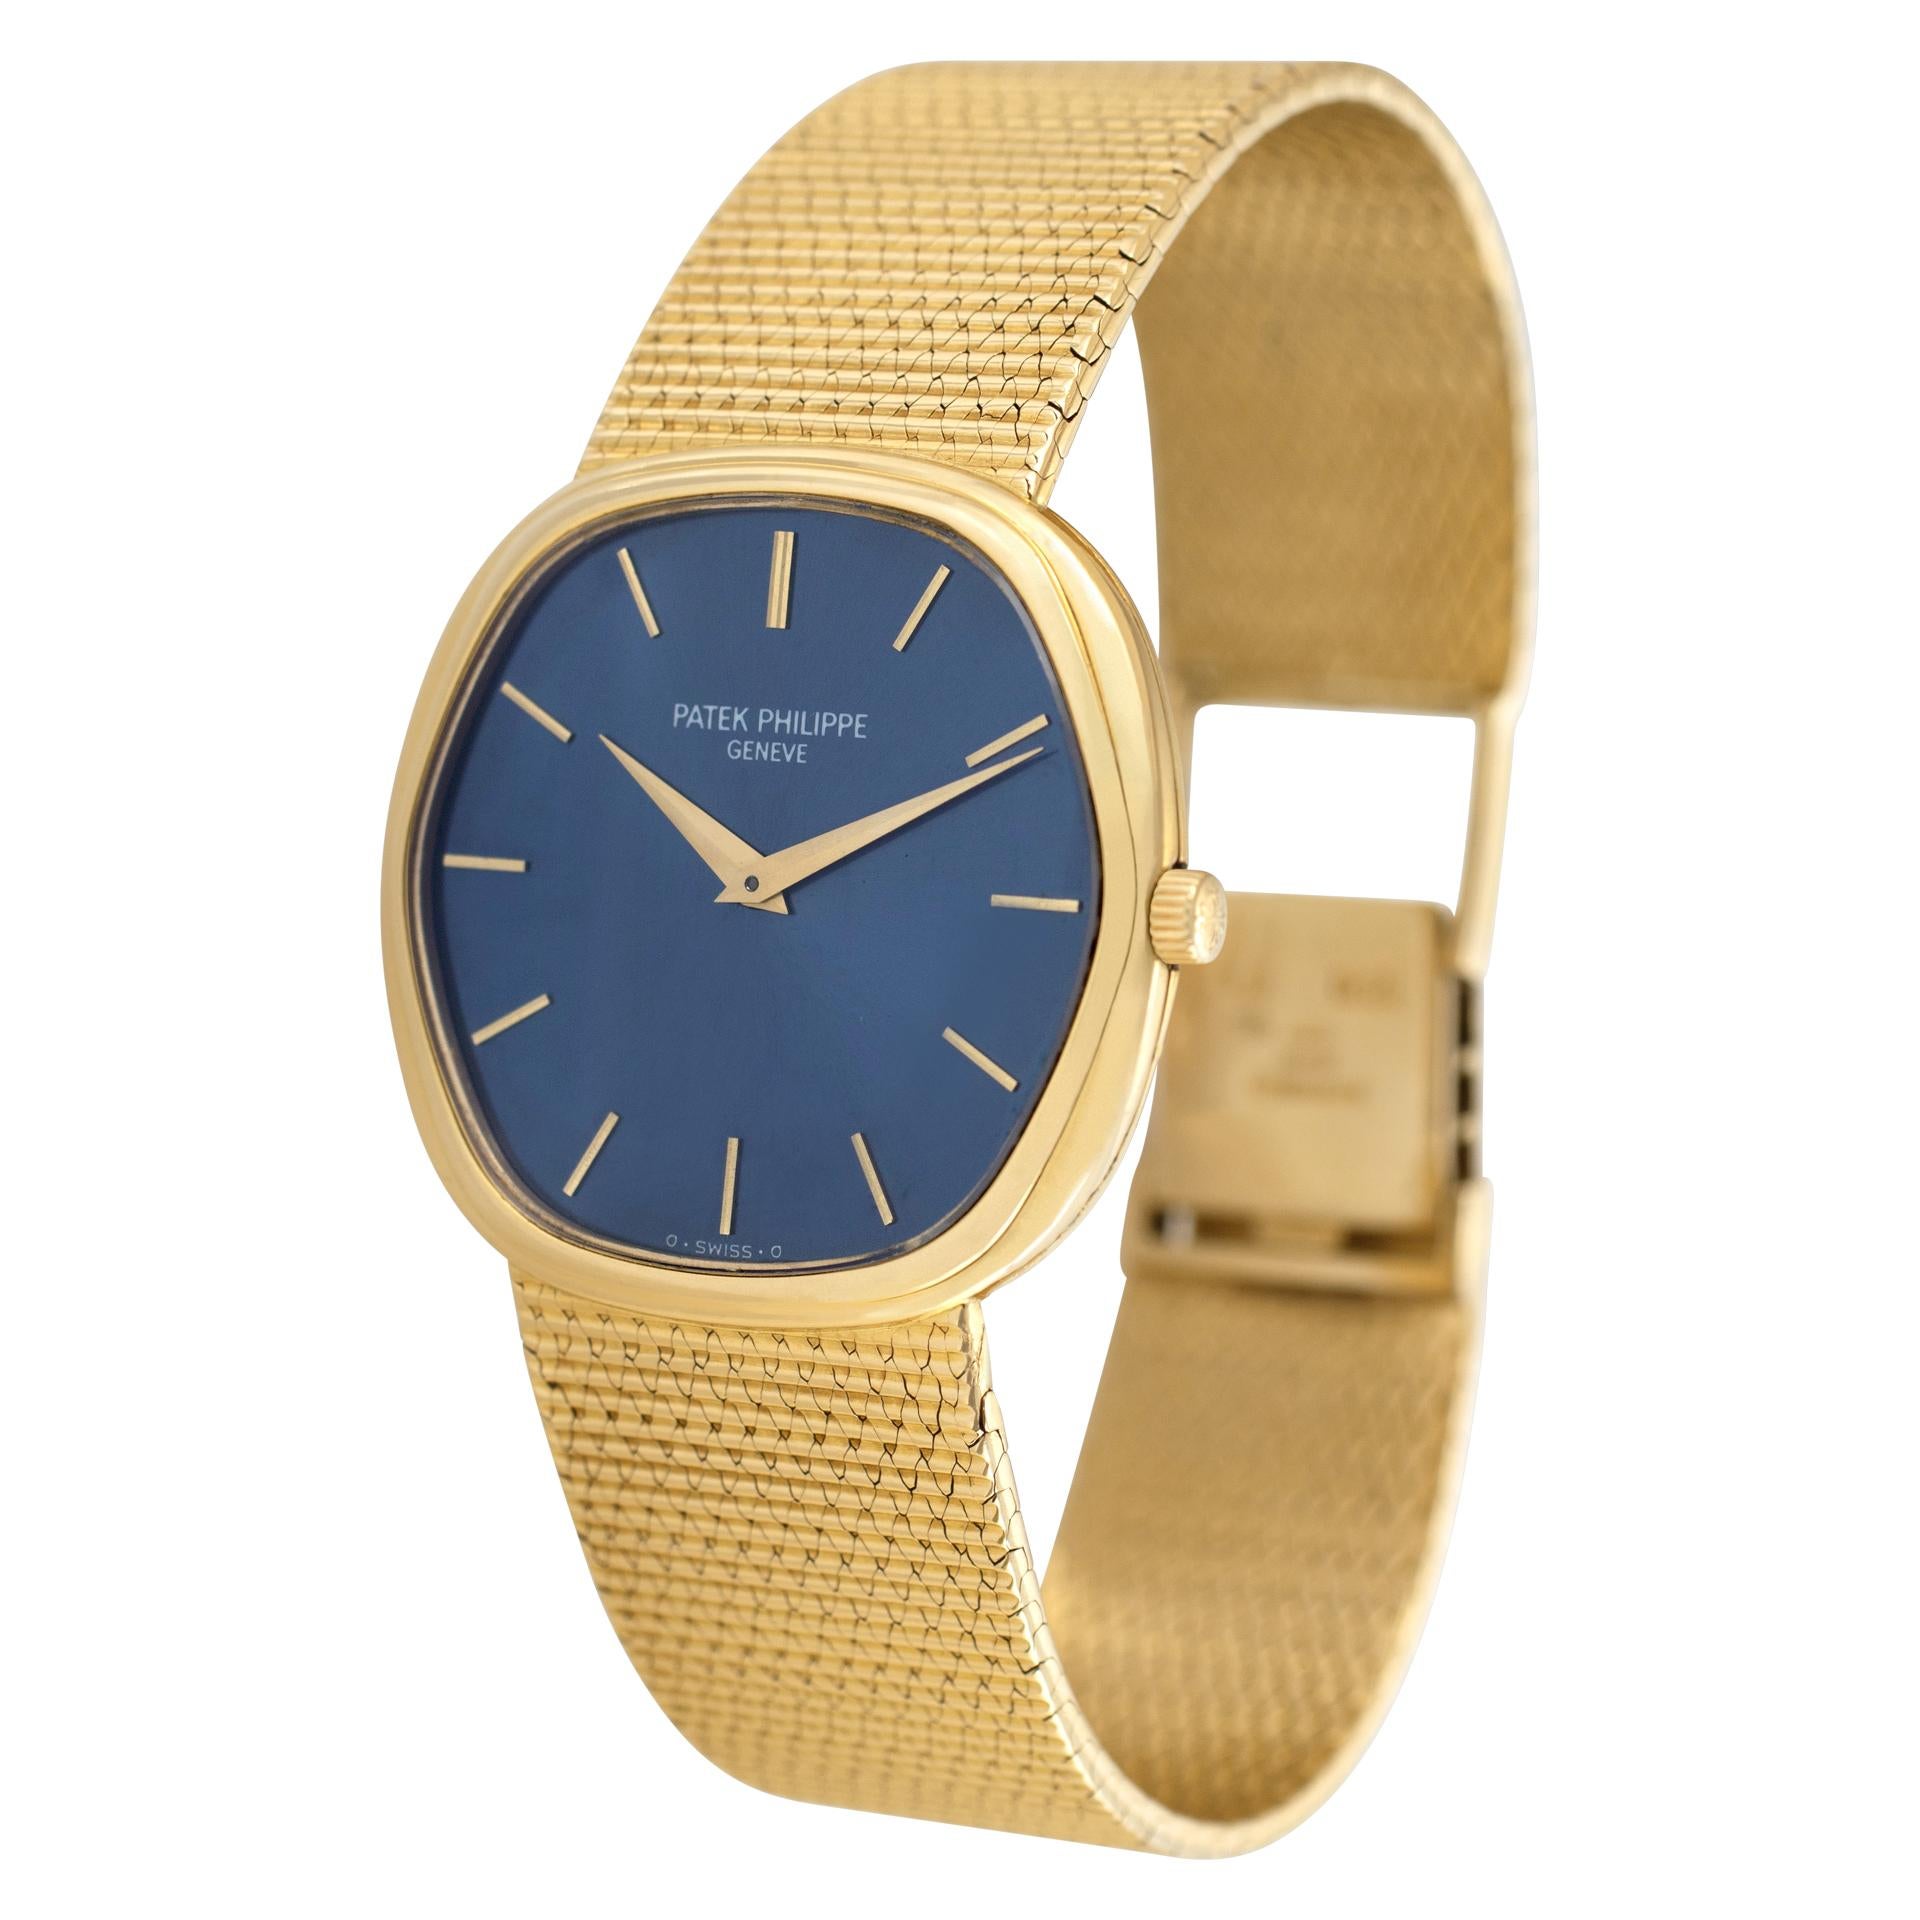 Patek Philippe Golden Ellipse in 18k yellow gold with navy Sigma dial. Auto. 27 jewels movement. 33 mm case size. Circa 1970. Will fit up to a 7 inch wrist. Ref 3861/1. Fine Pre-owned Patek Philippe Watch. Certified preowned Dress Patek Philippe